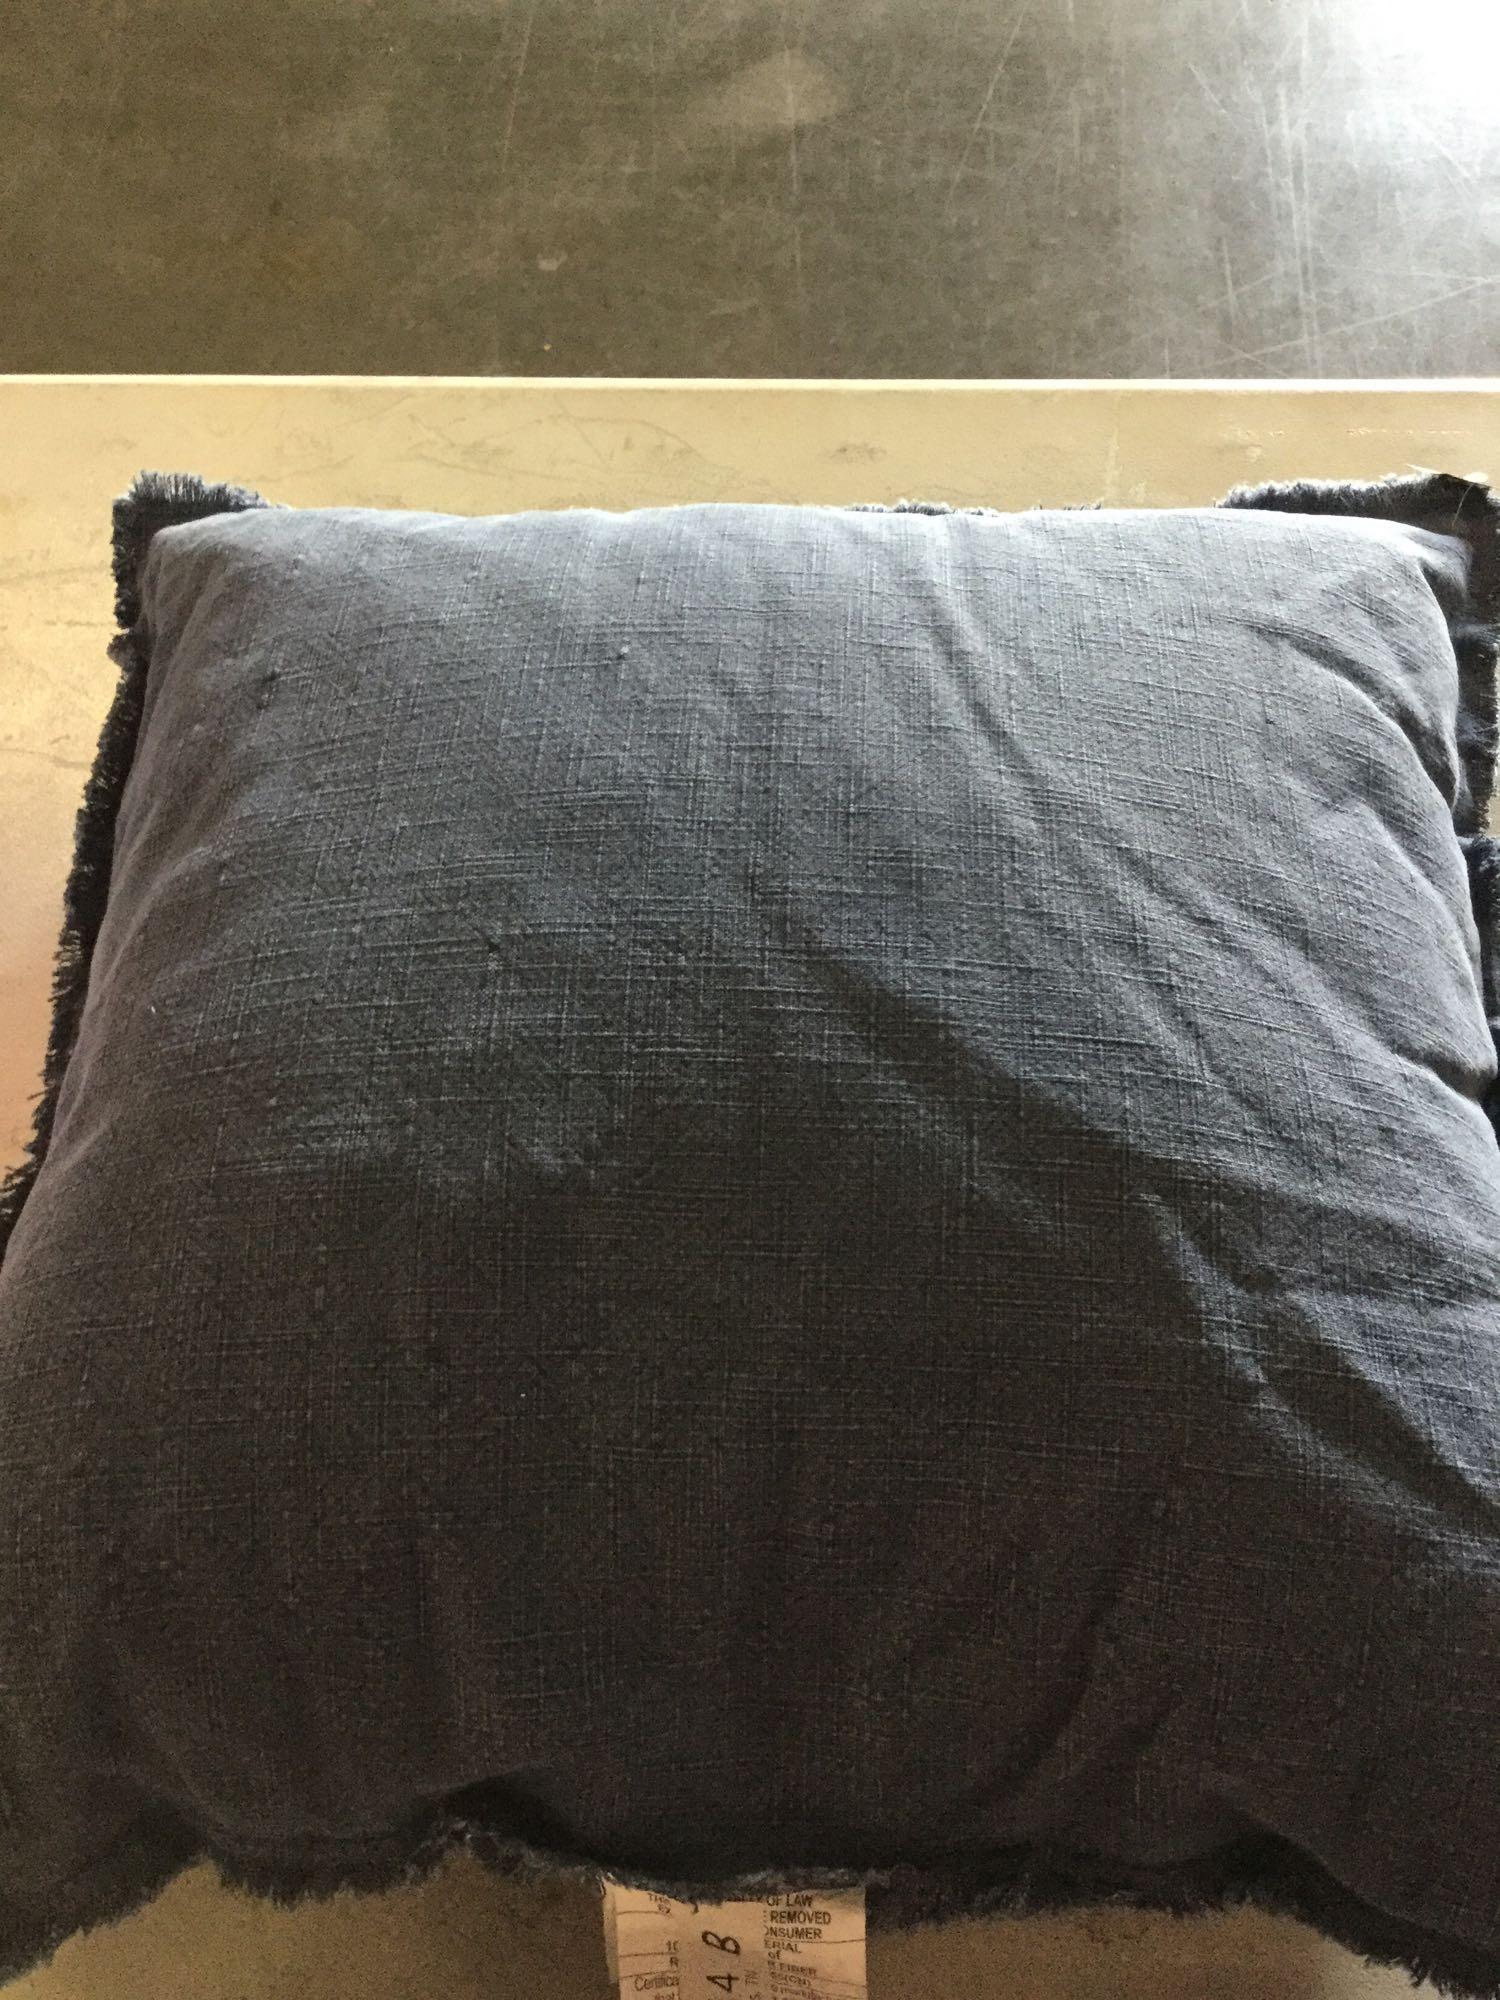 Multiple Pillows and Bedding material